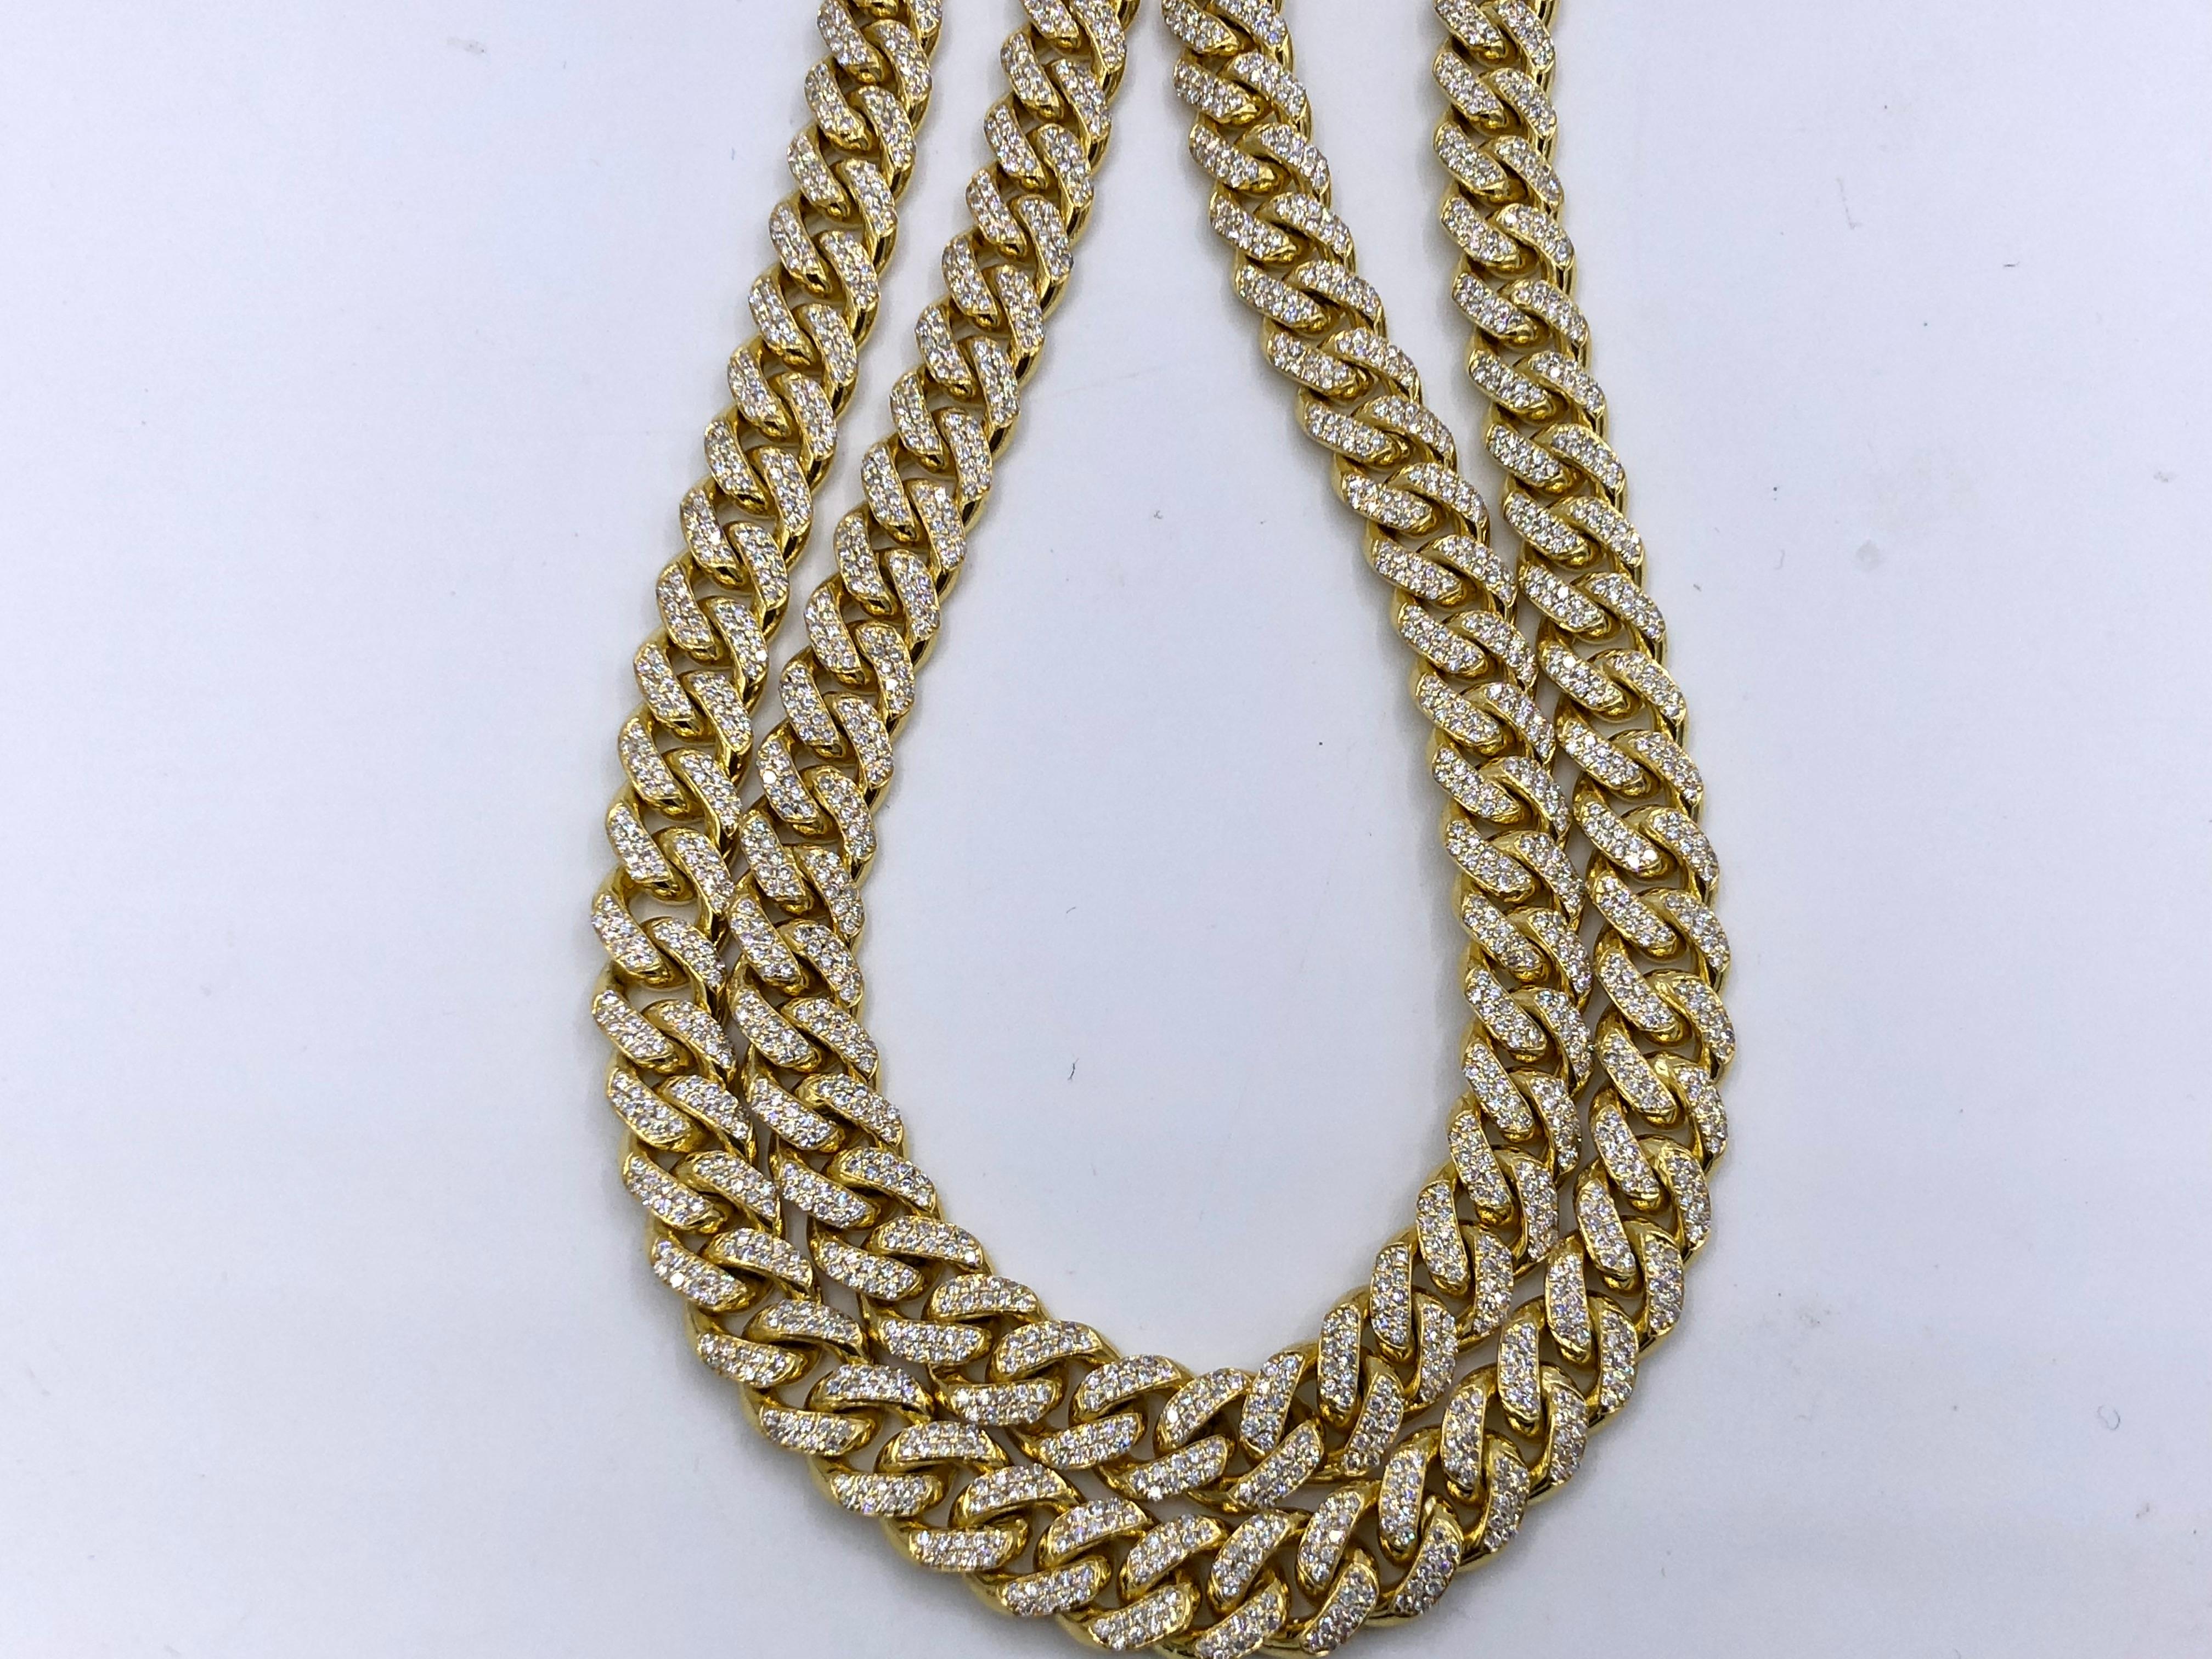 14KT yellow gold diamond Cuban link chain with 13.50 ct total weight of pave diamonds

This product comes with a certificate of appraisal
This product will be packaged in a custom box

Composition:
14K yellow gold
13.50 cts white diamonds
Length: